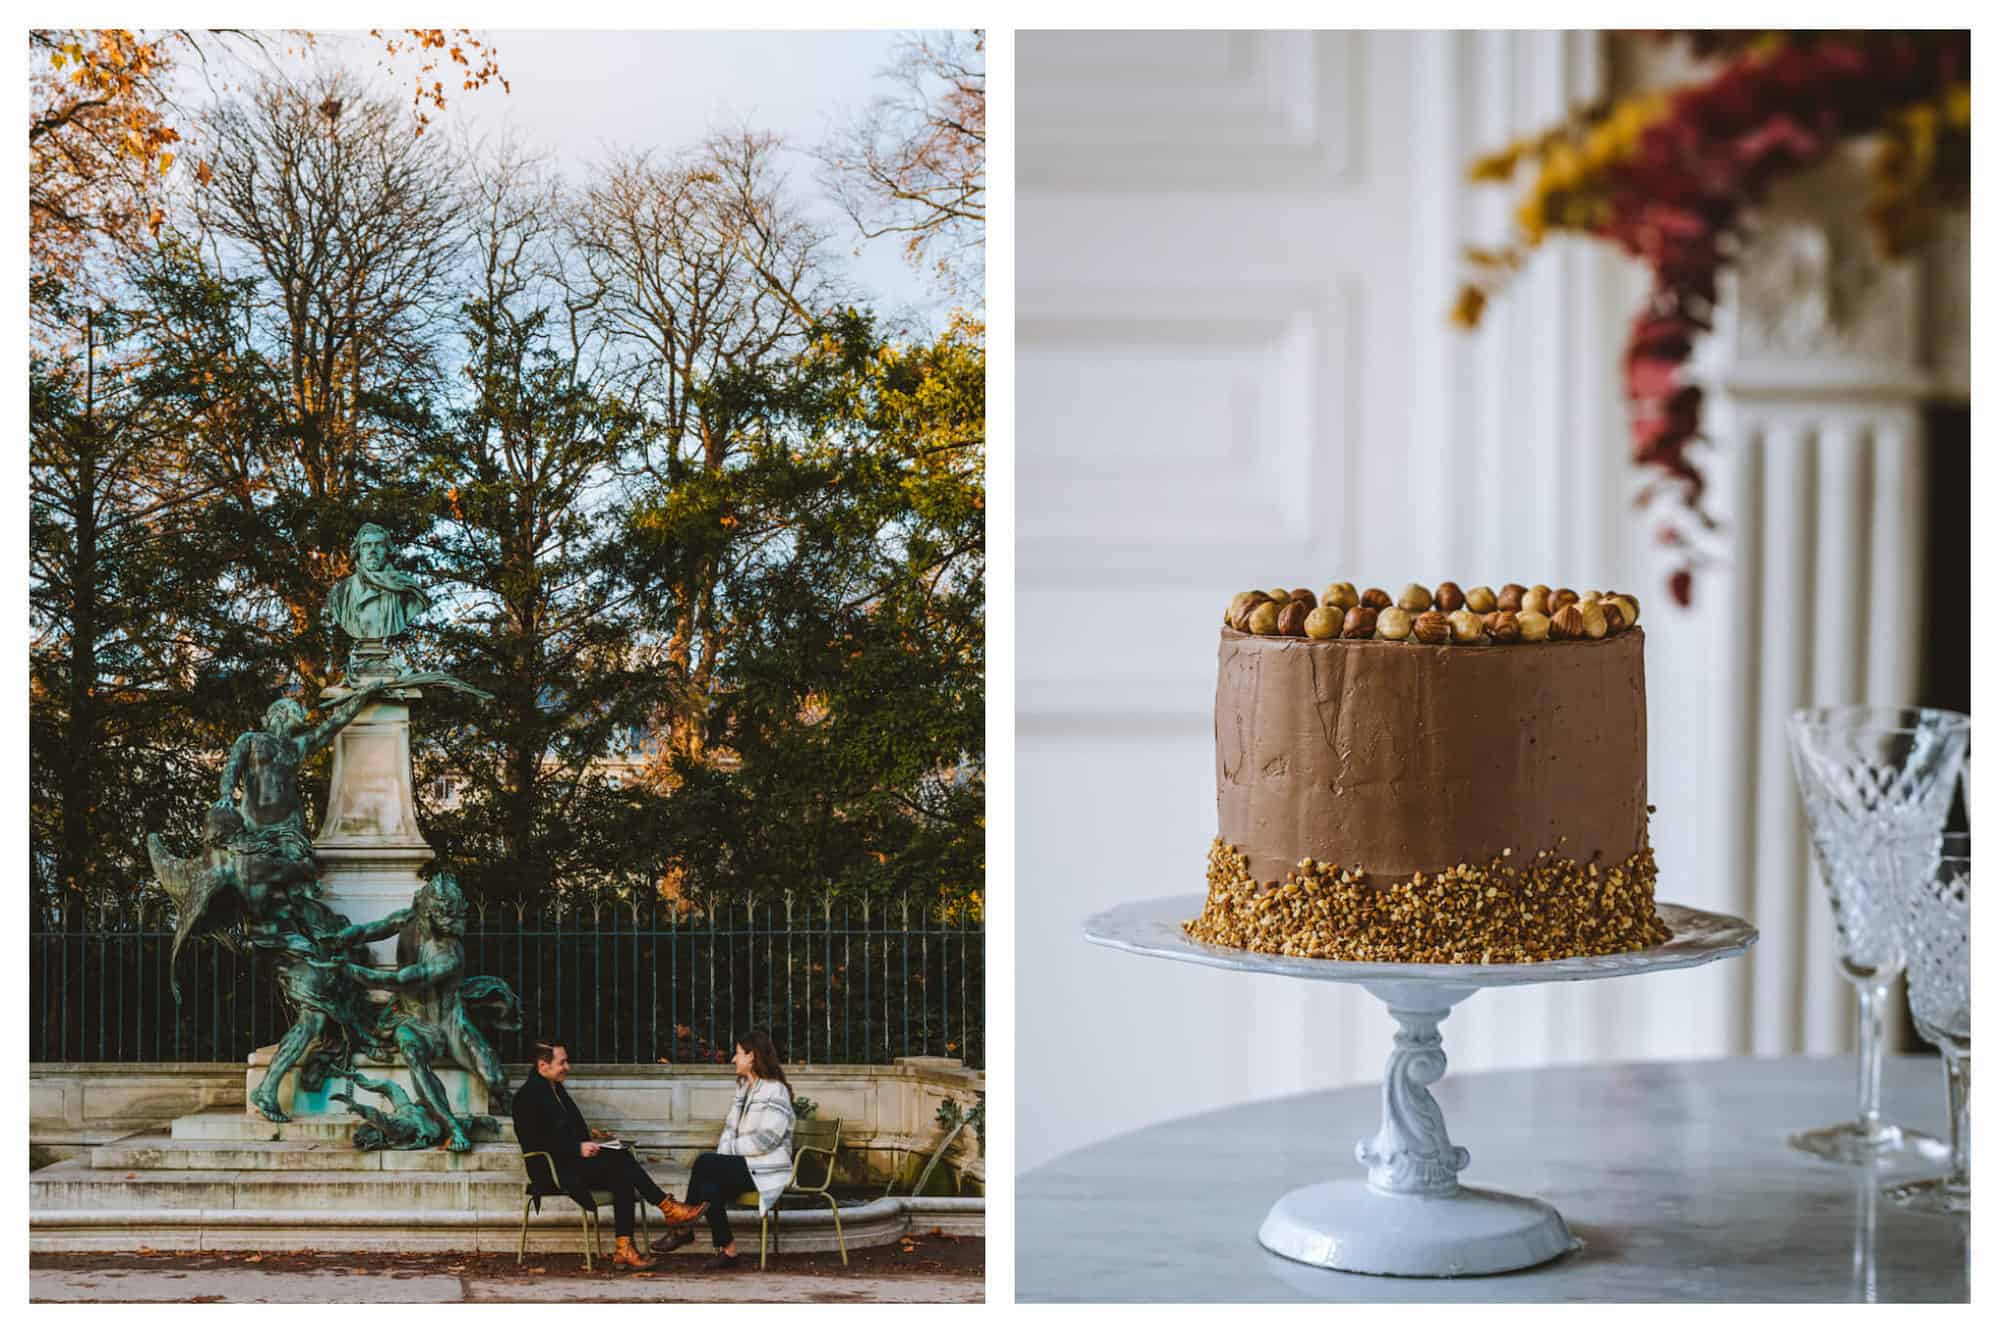 Left: A man and woman sit in front of a statue at the Luxembourg Gardens. Right: A praline cake is shown on a white cake stand.